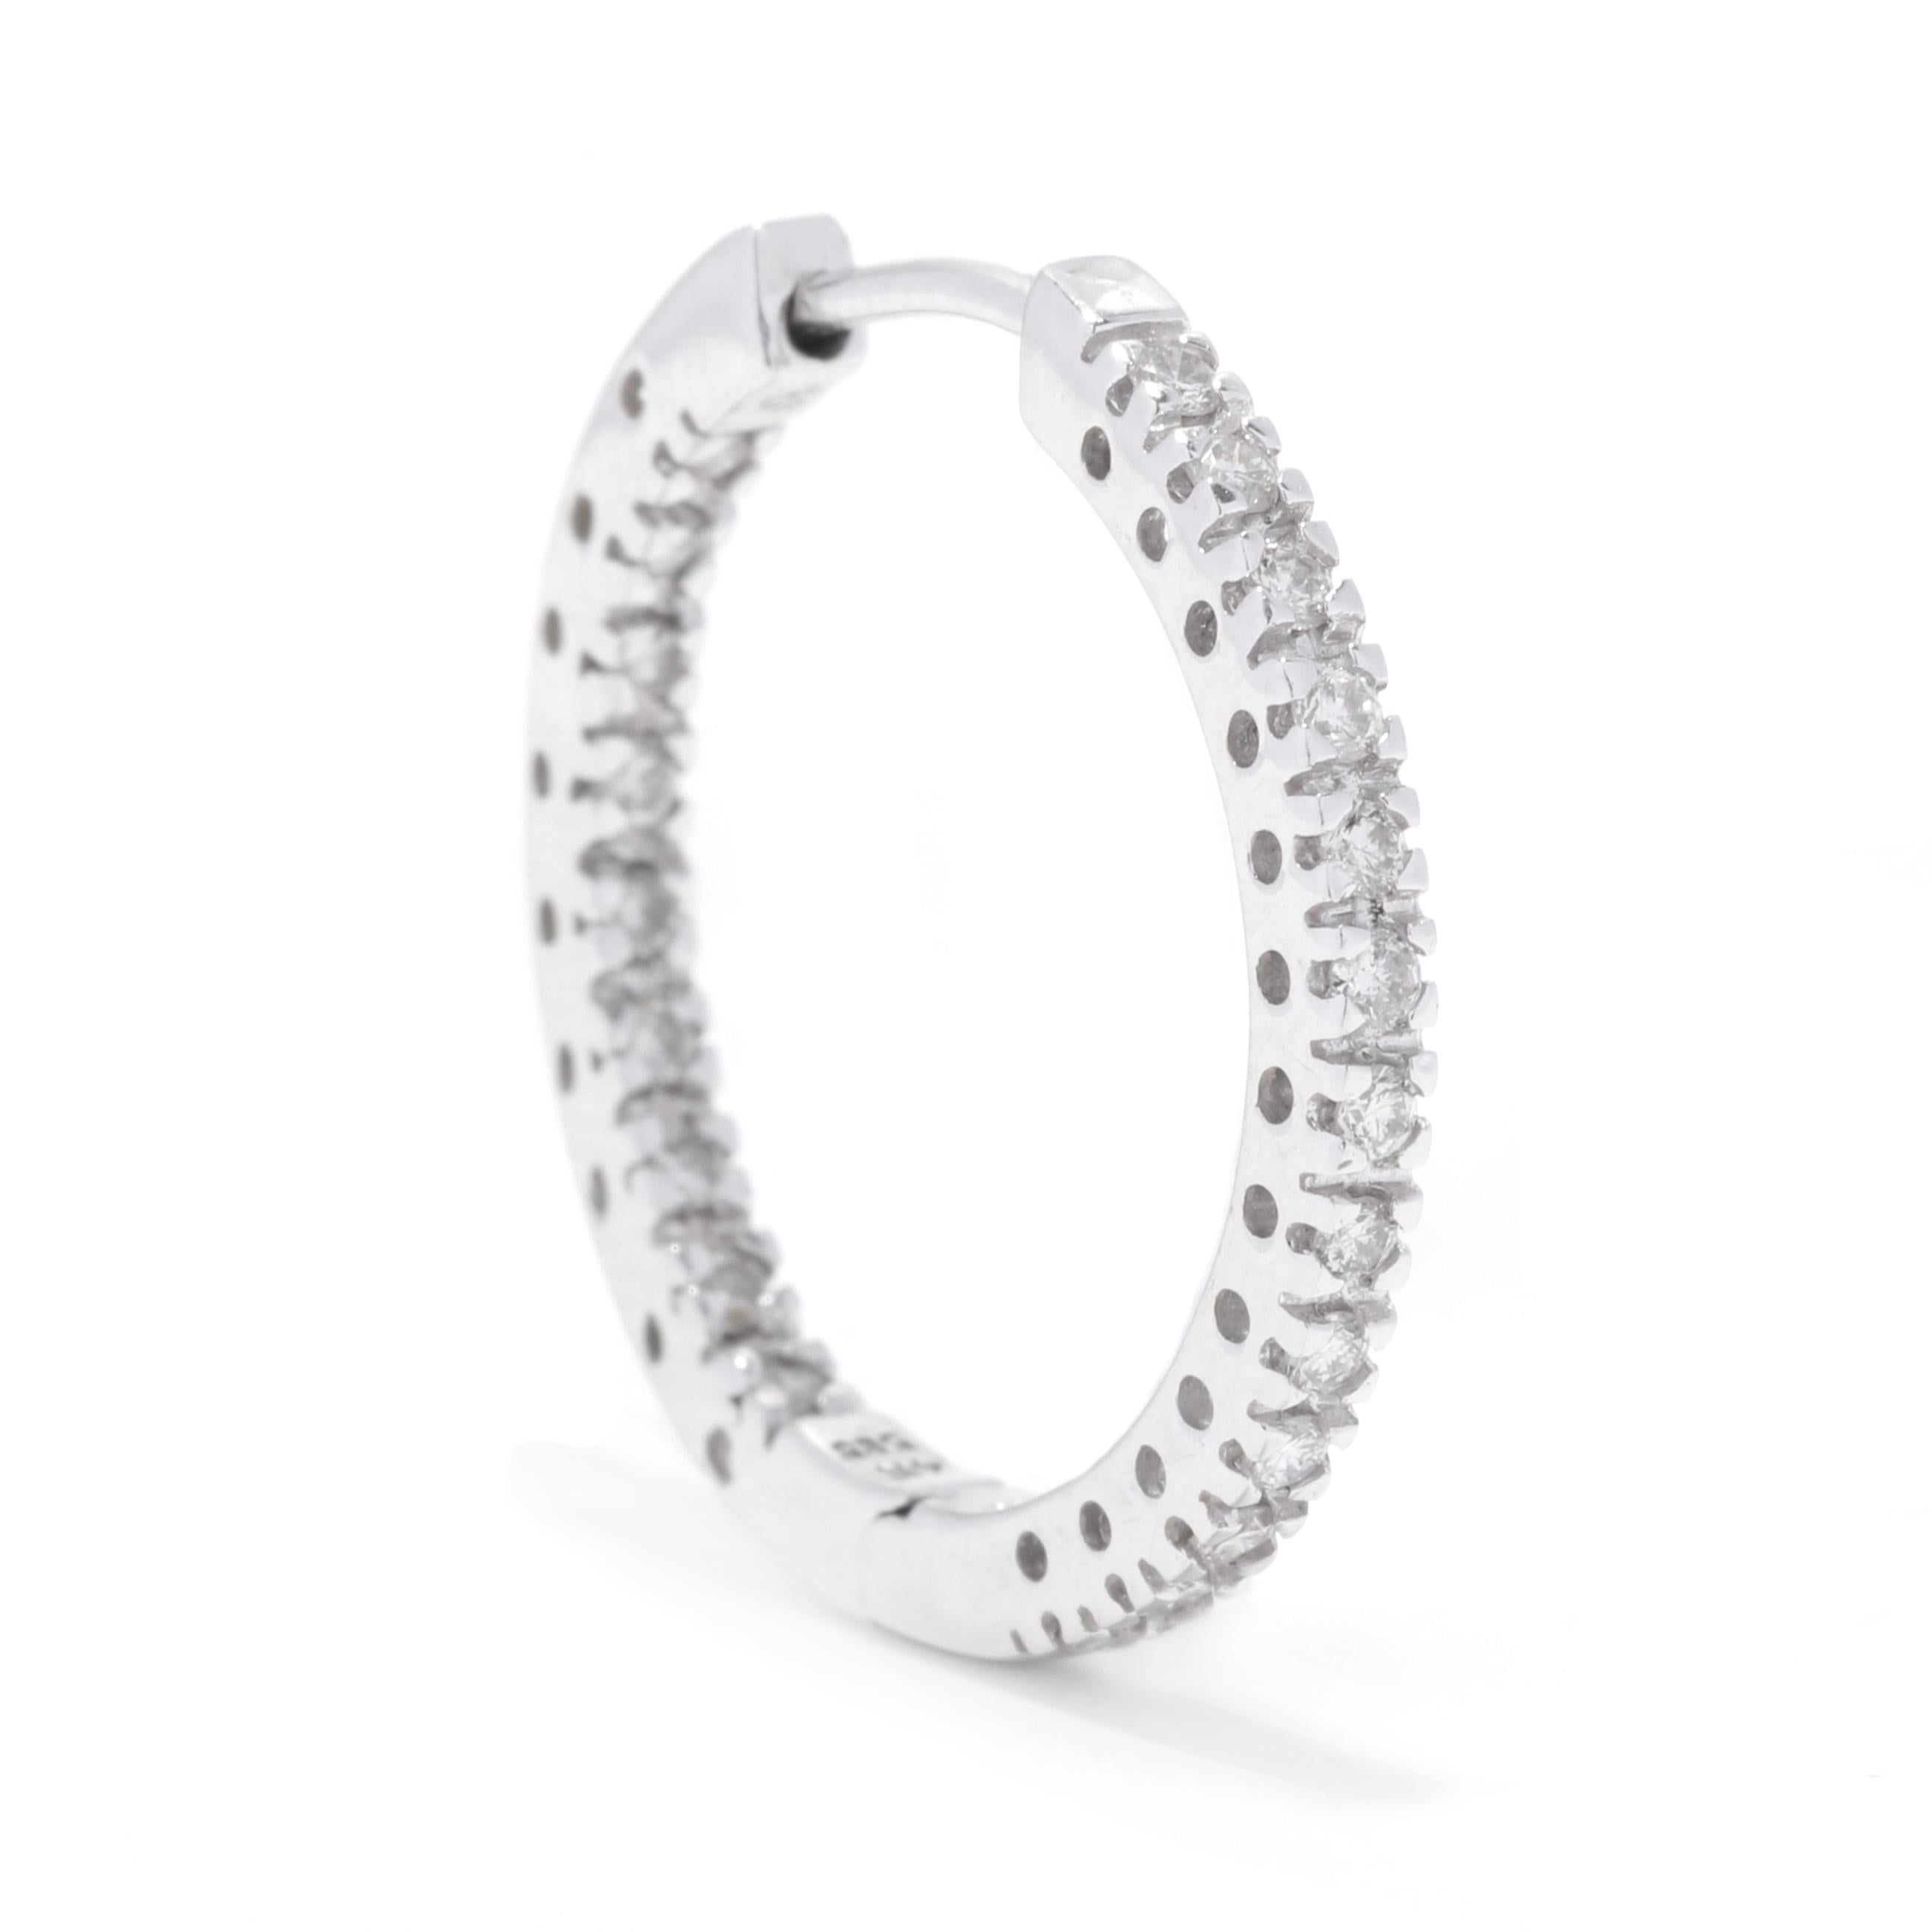 A pair of 14 karat white gold thin diamond inside outside hoop earrings. These quarter size hoops feature prong set, round brilliant cut diamonds weighing approximately 1 total carat on the outer front and inner back, and with latch back